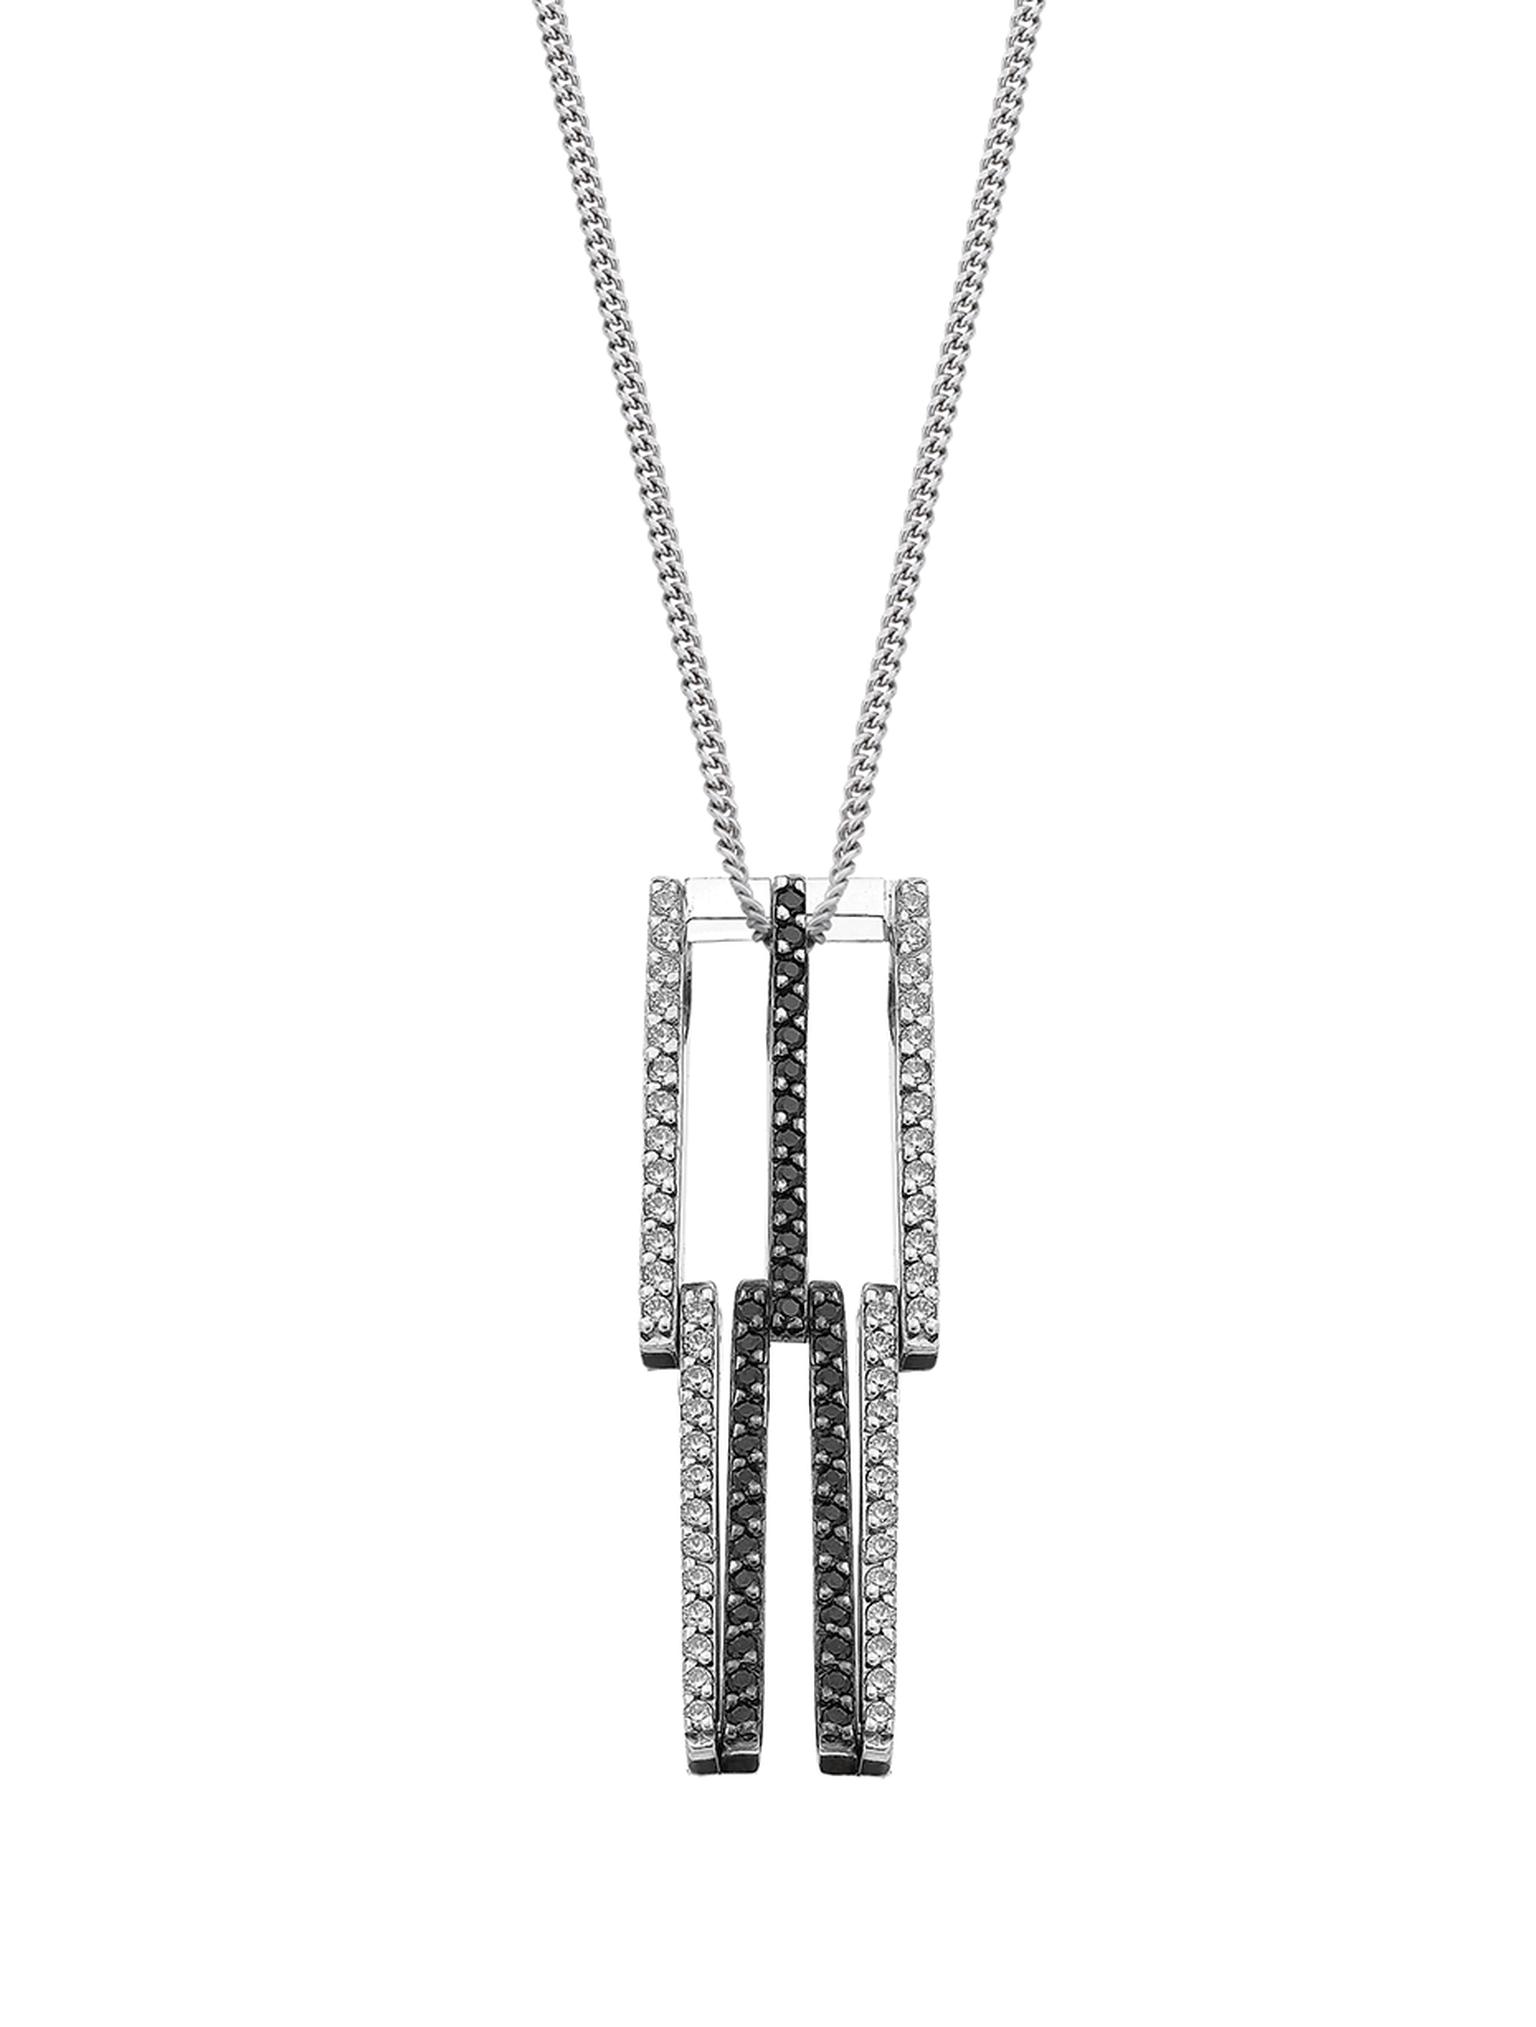 MyriamSOS Transformers In/Out Square pendant in white palladium gold with white and black diamonds. The pendant can be worn in 18 different ways (see right).